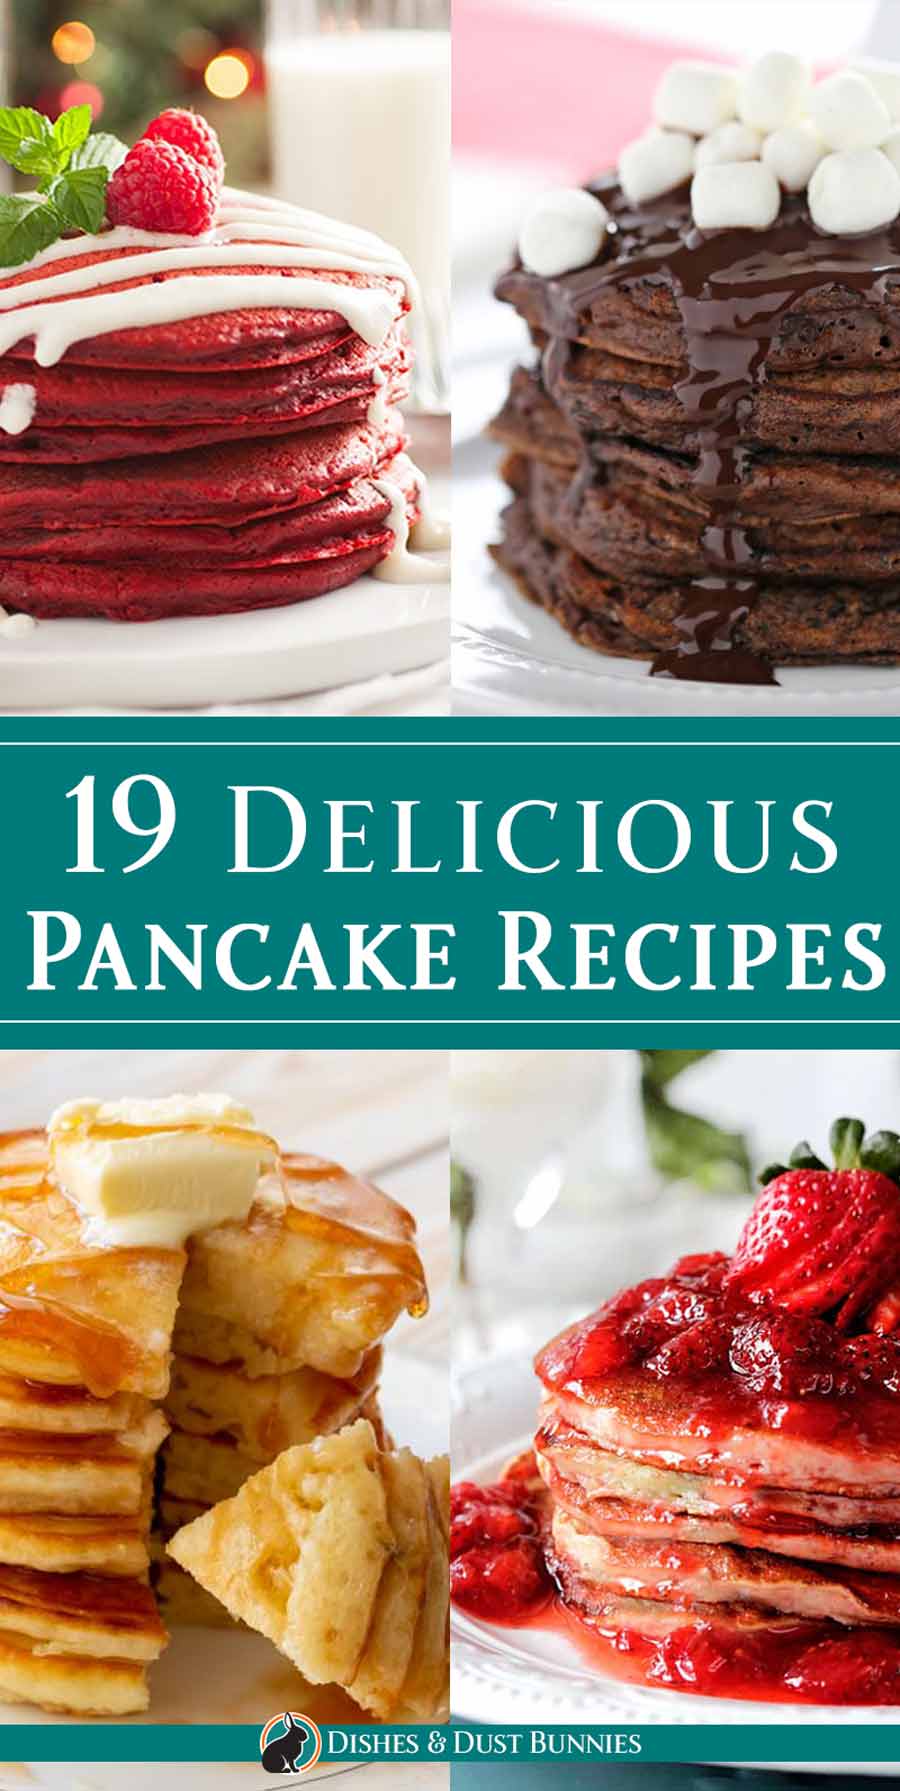 19 Delicious Pancake Recipes - Dishes & Dust Bunnies